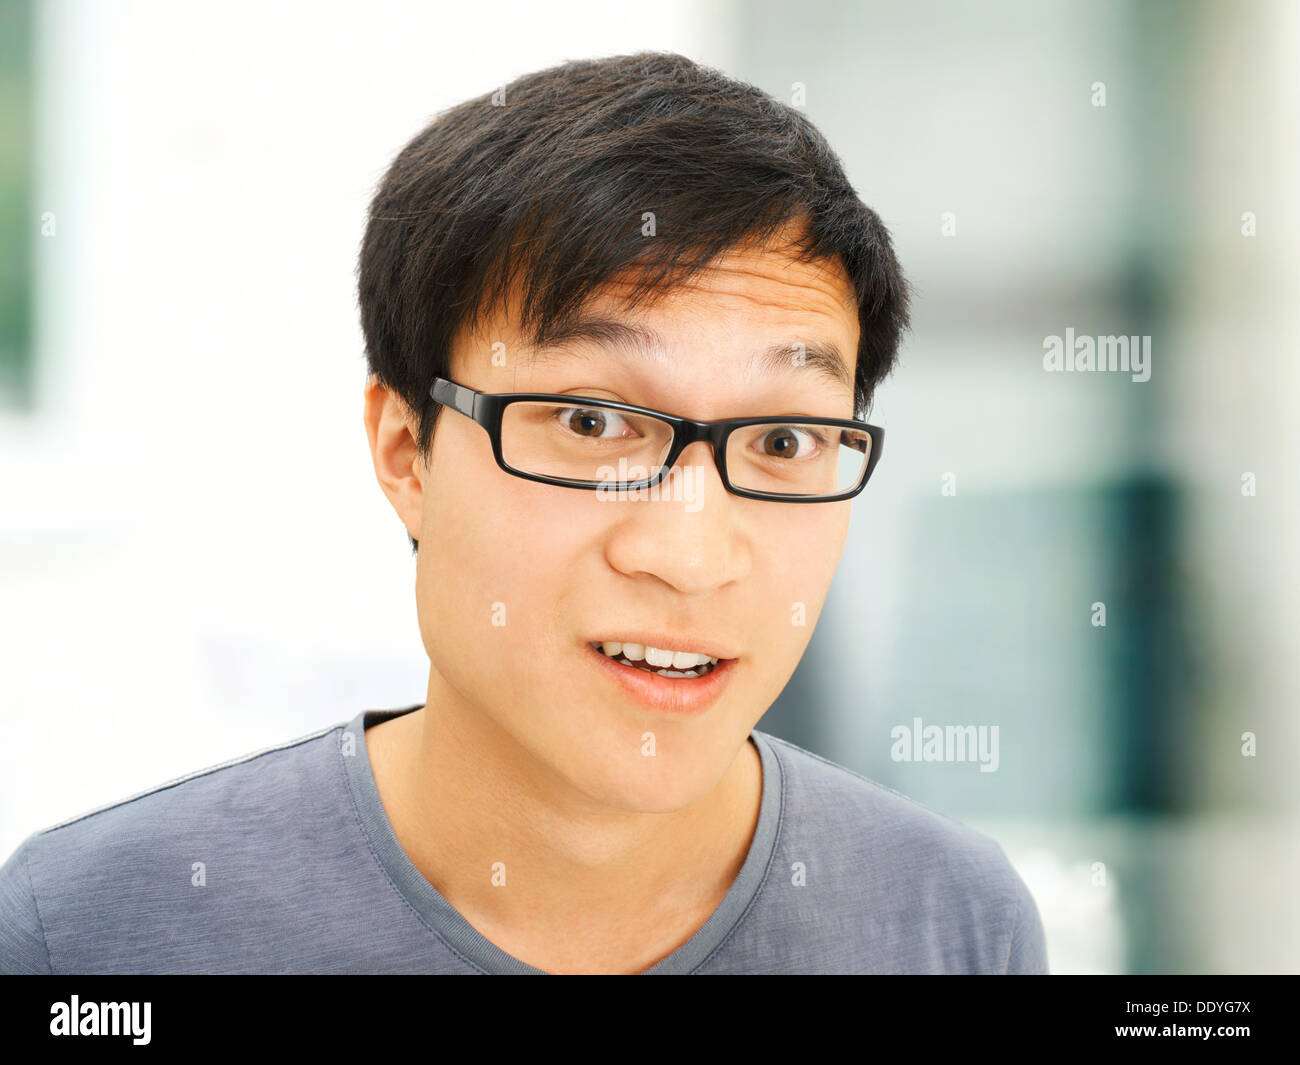 Young man, Asian, student with glasses, smiling, surprised Stock Photo -  Alamy